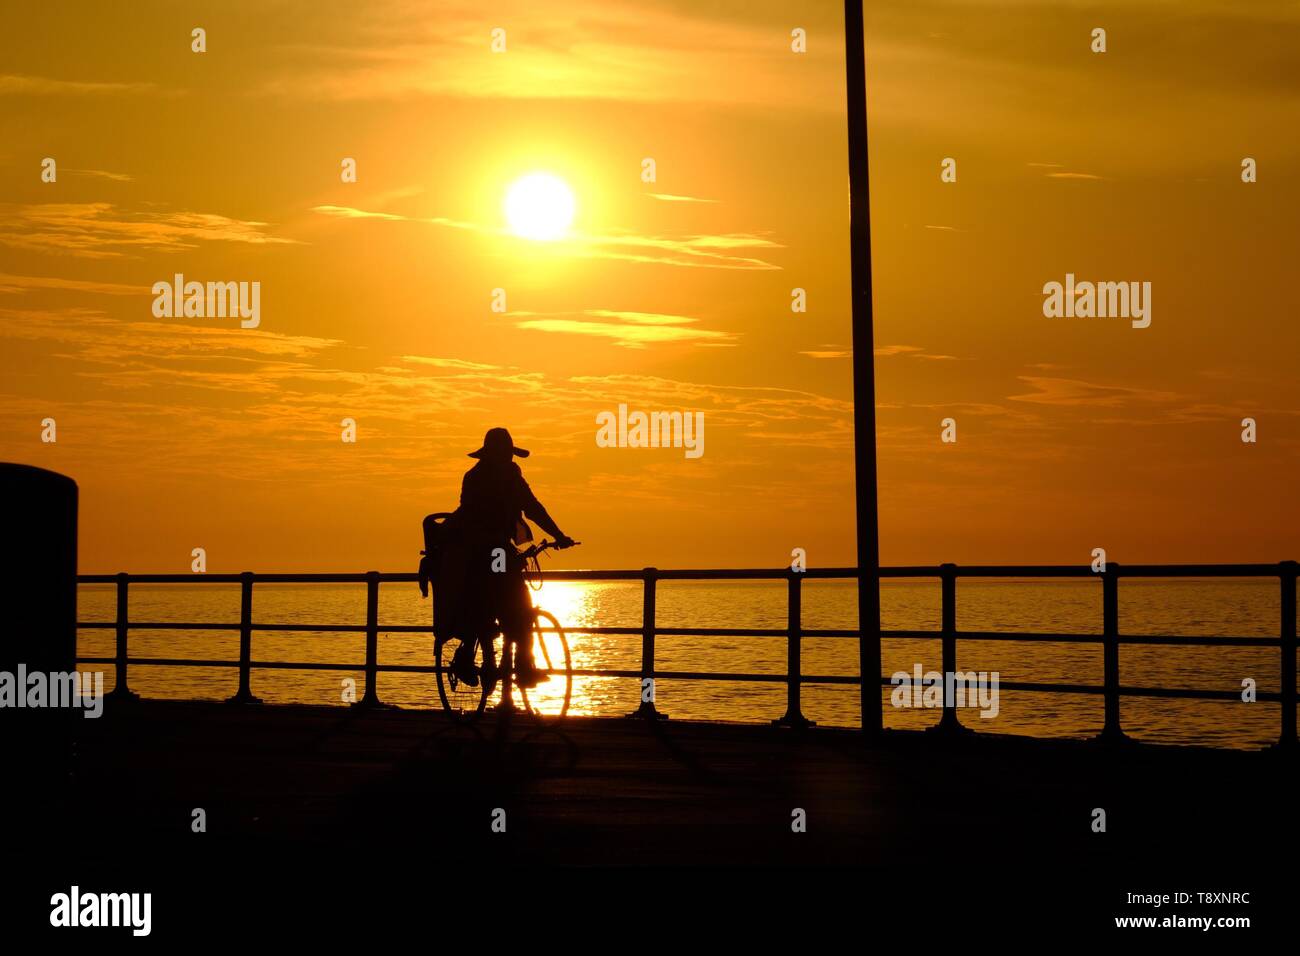 Aberystwyth Wales, UK. 15th May, 2019. UK weather: Scintillating sunset in Aberystwyth on a glorious evening after a day of blue skies and warm spring sunshine . photo Credit: Keith Morris/Alamy Live News Stock Photo